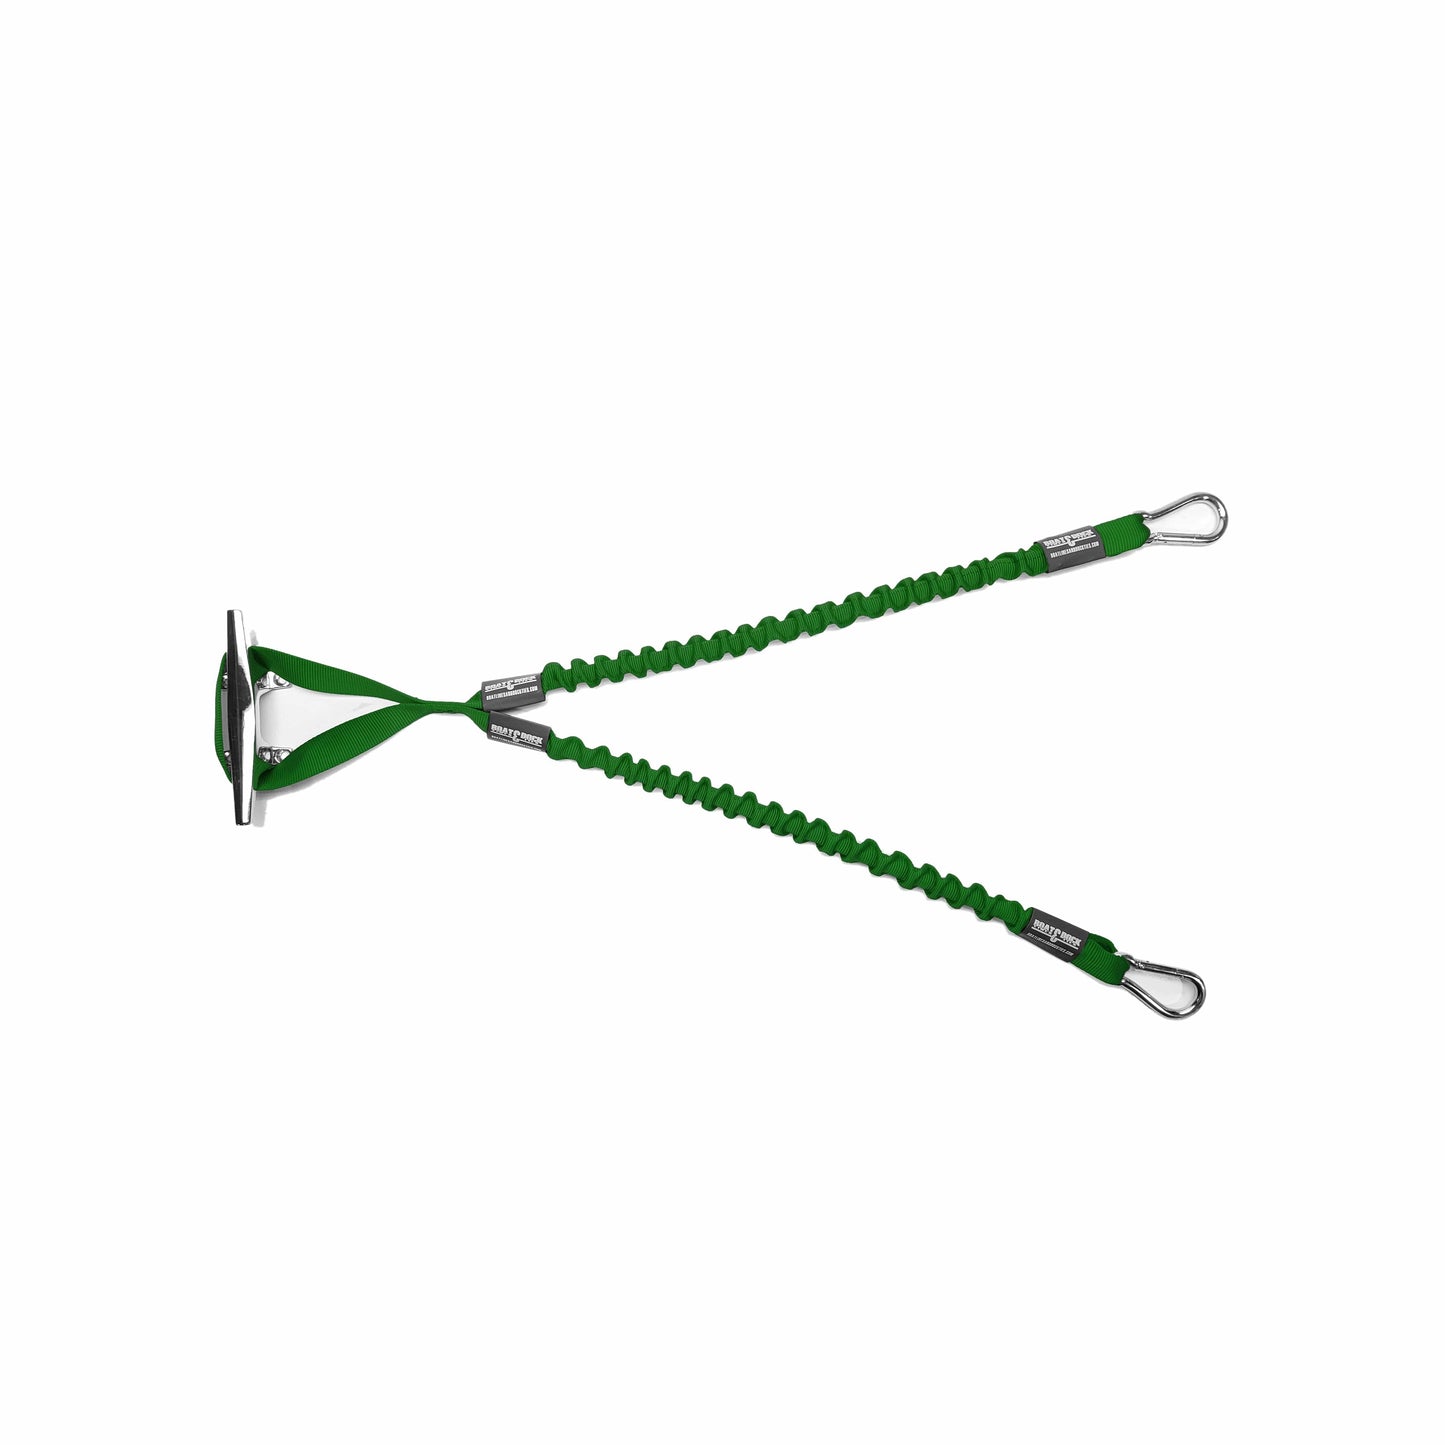 Wake Defender -3 Point Dock Attachment System - 1 Loop End with 2 Hook Ends - Boat Lines & Dock Ties Boat Lines & Dock Ties 24 Inch leg / Green